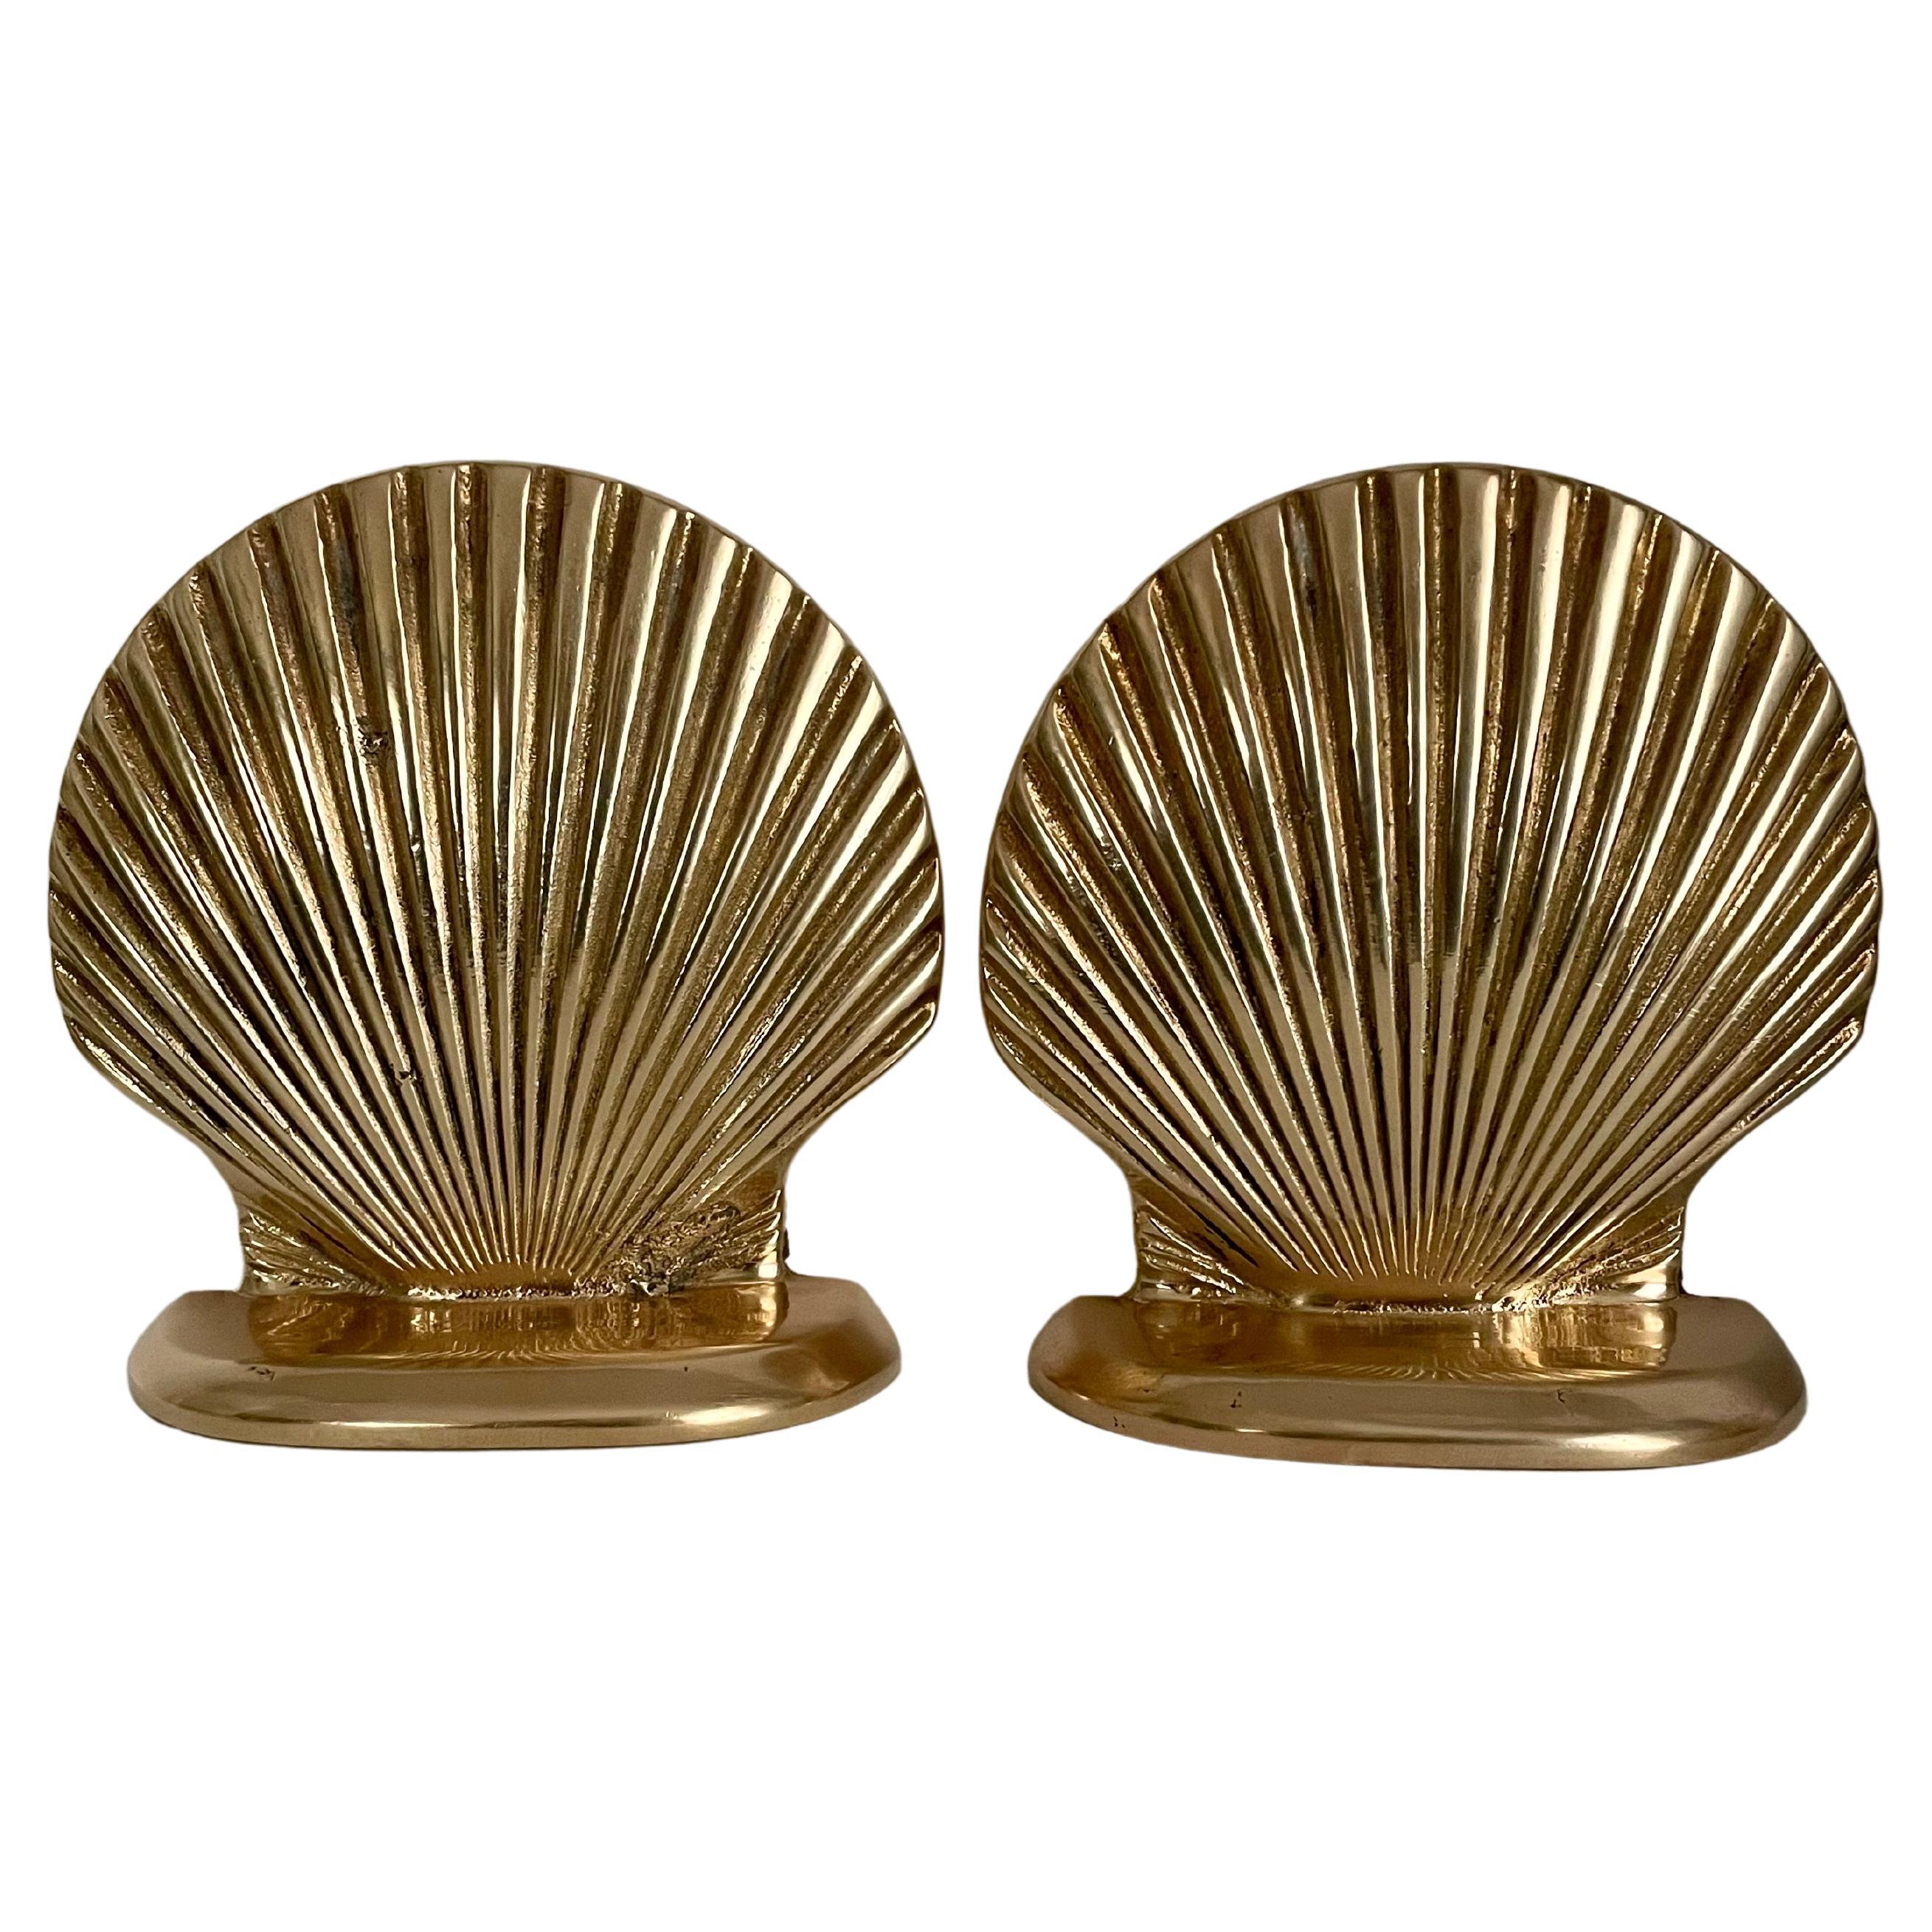 Vintage Brass Clam or Scallop Shell Seashell Bookends For Sale